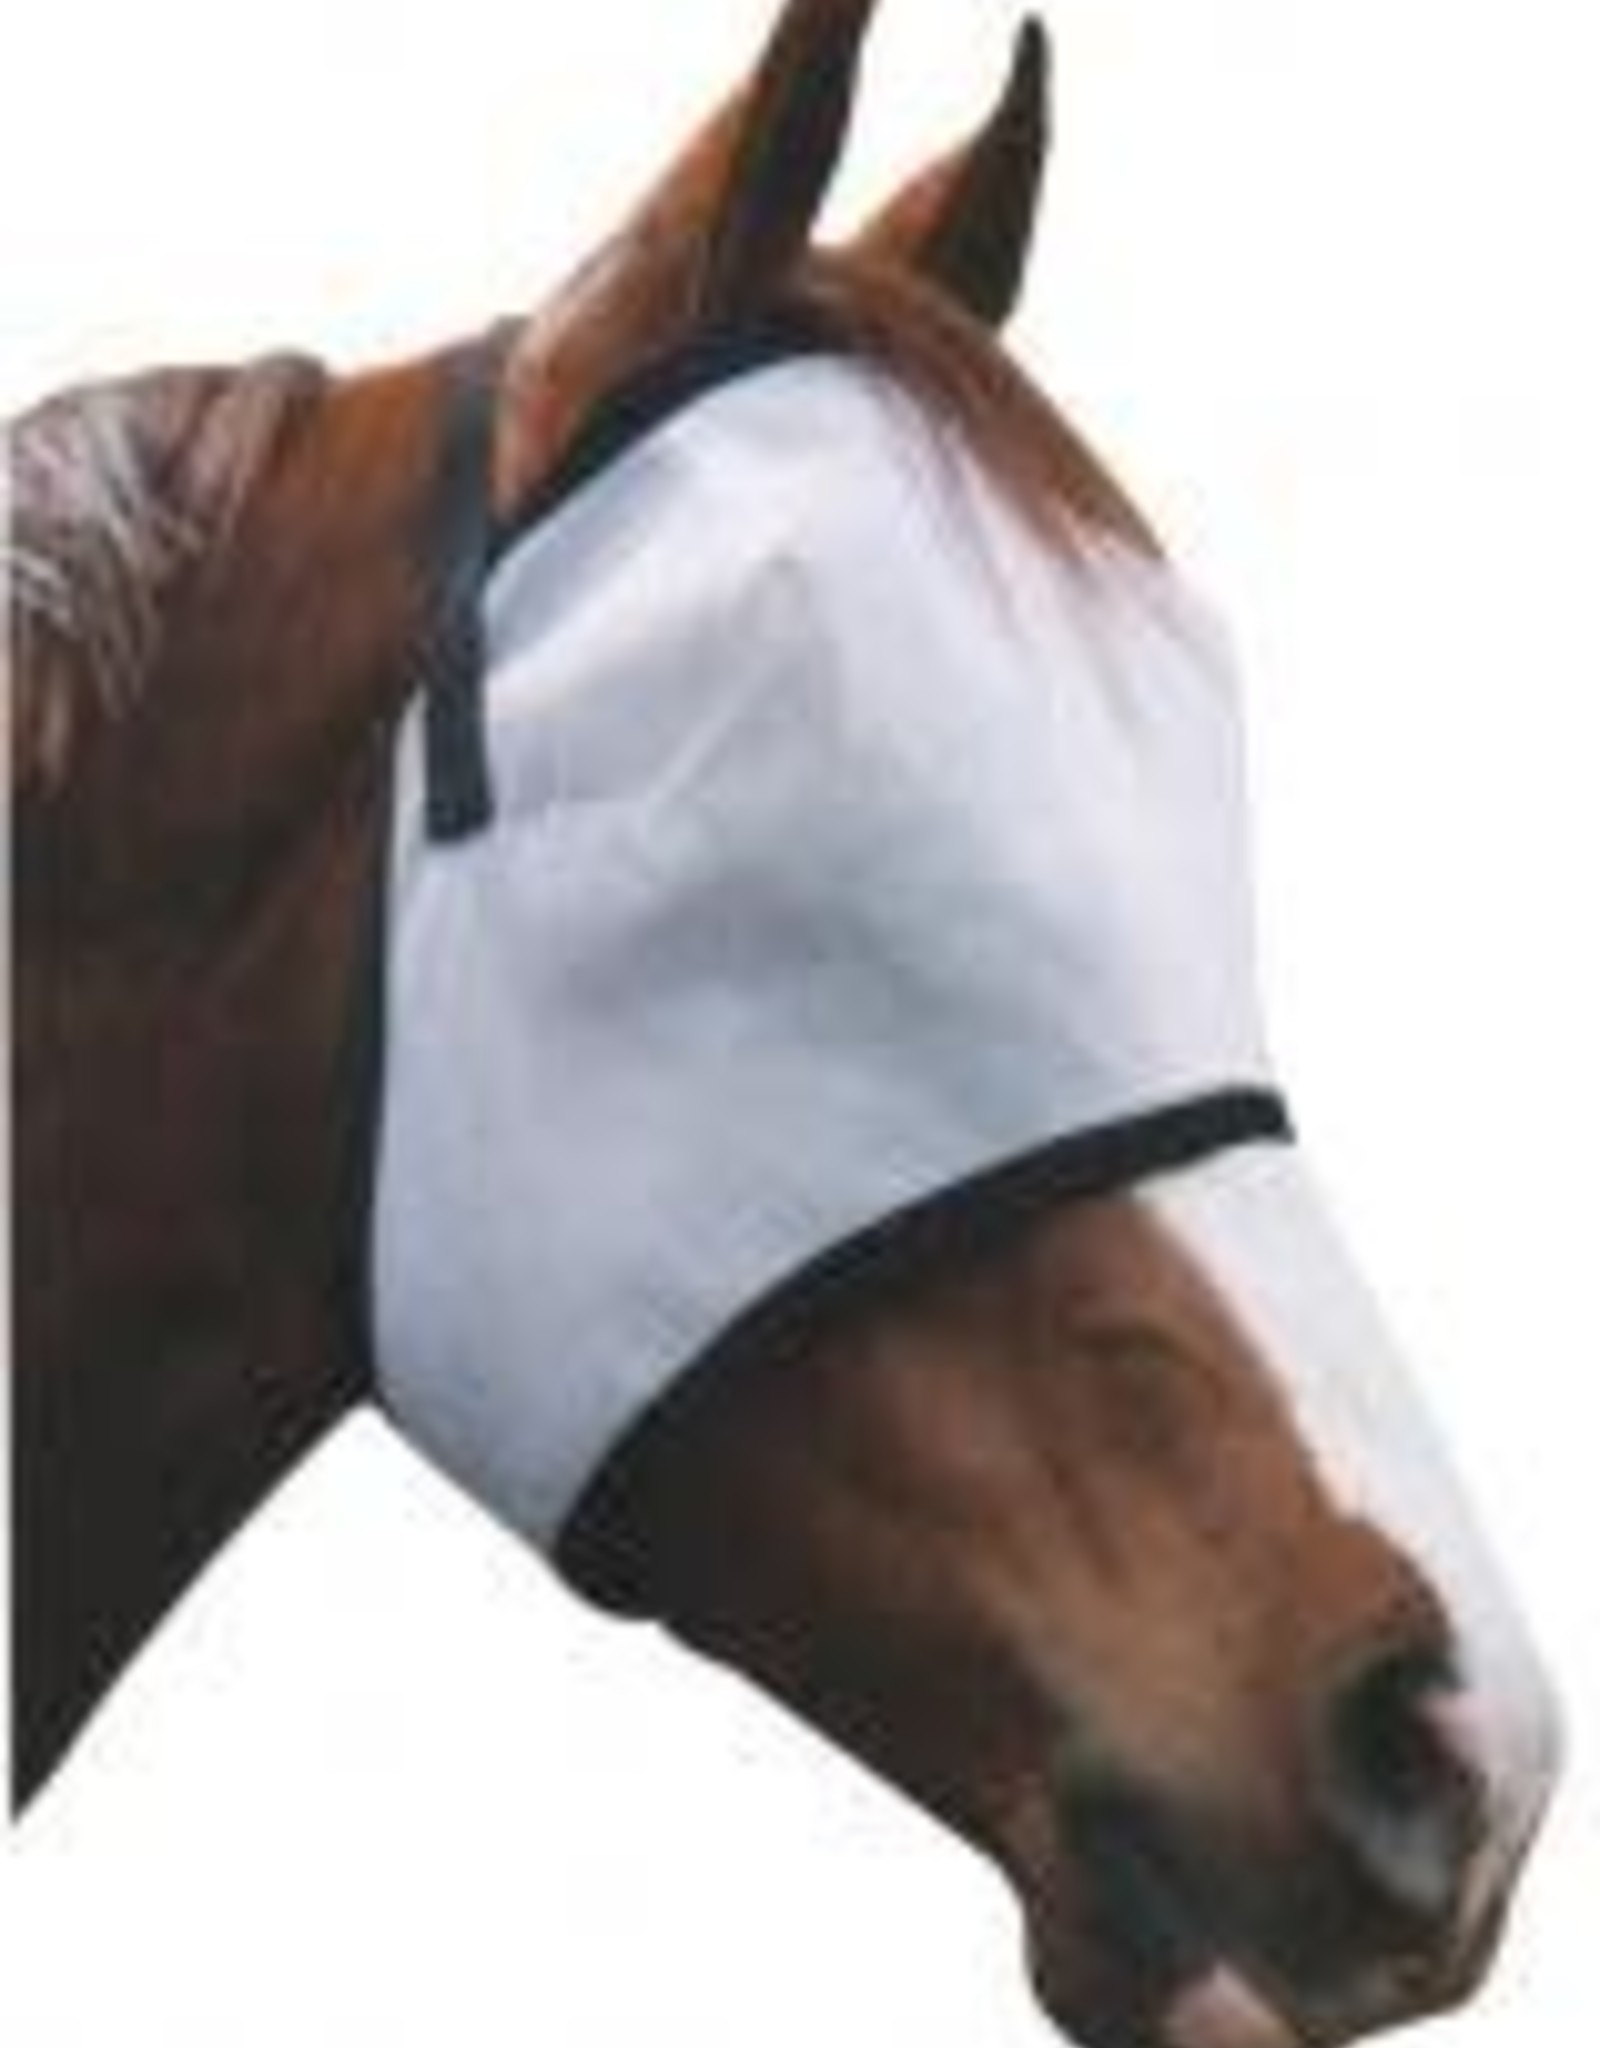 Deluxe Flymask - Pony